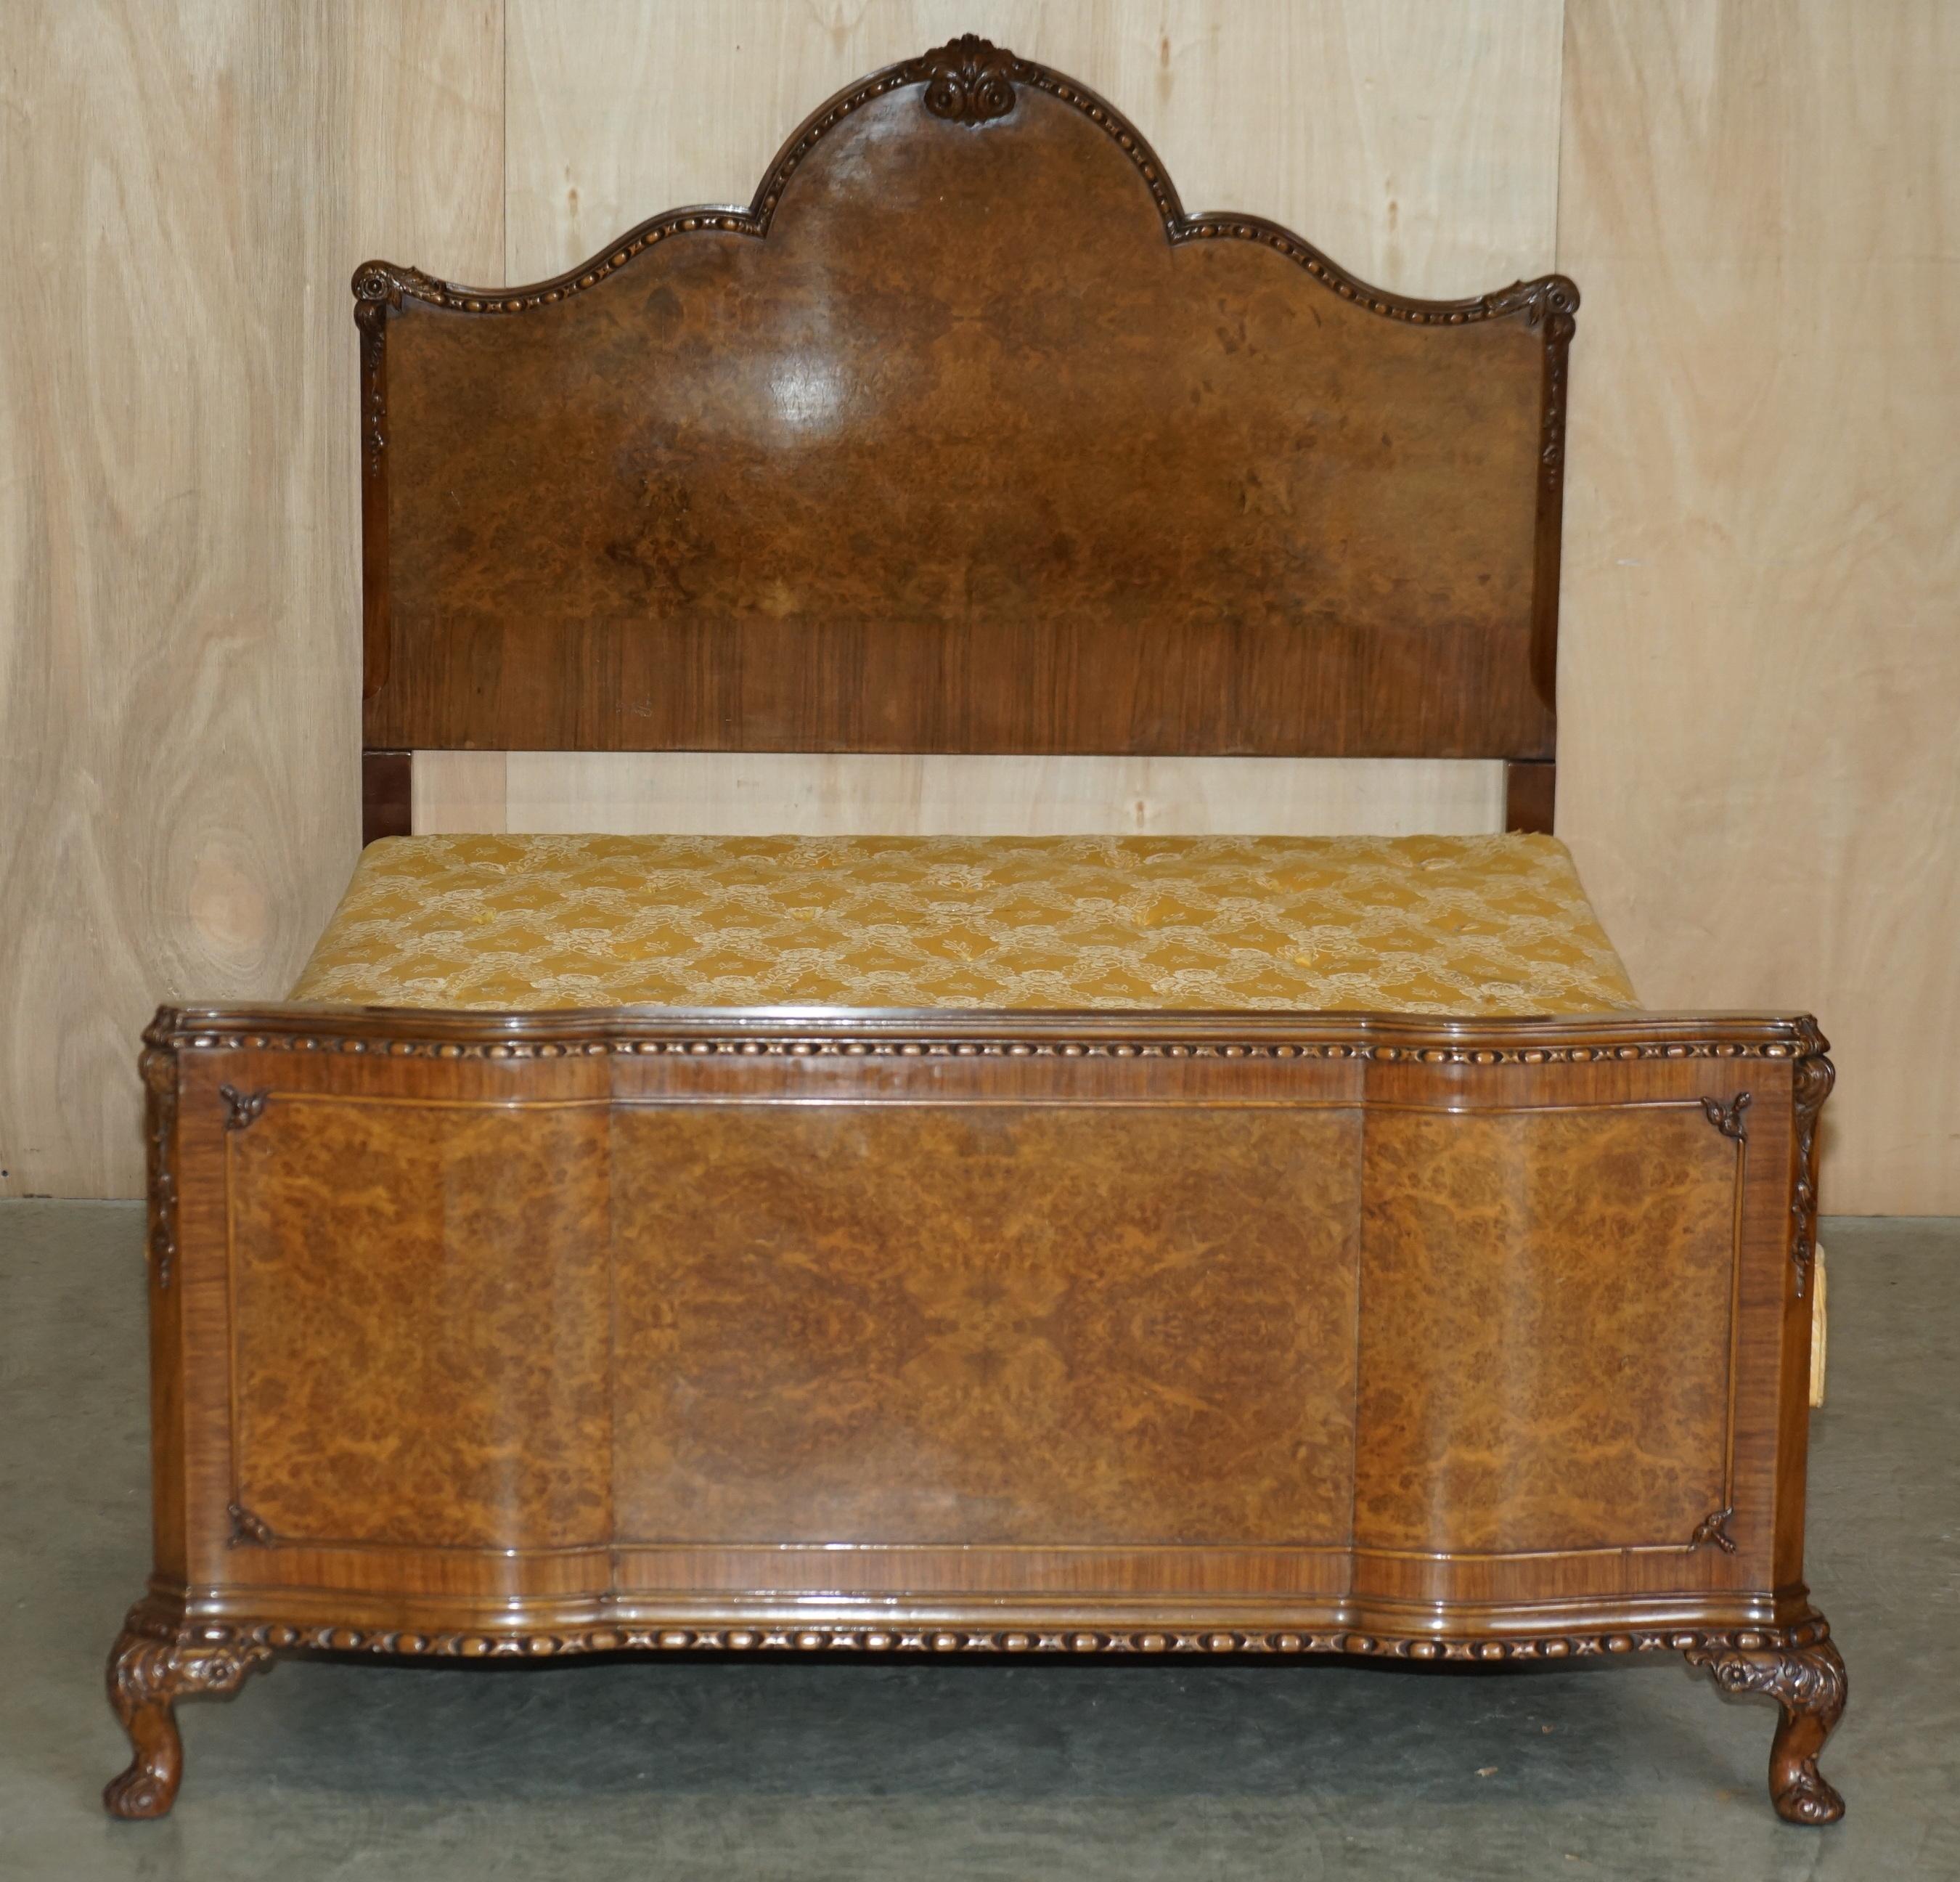 We are delighted to offer for sale this stunning Circa 1950'S Waring & Gillow Burr Walnut bedstead frame with Vono rails retailed through Harrods London with the original Harrods Divan base.

A lovely original hand made in England burr Walnut bed